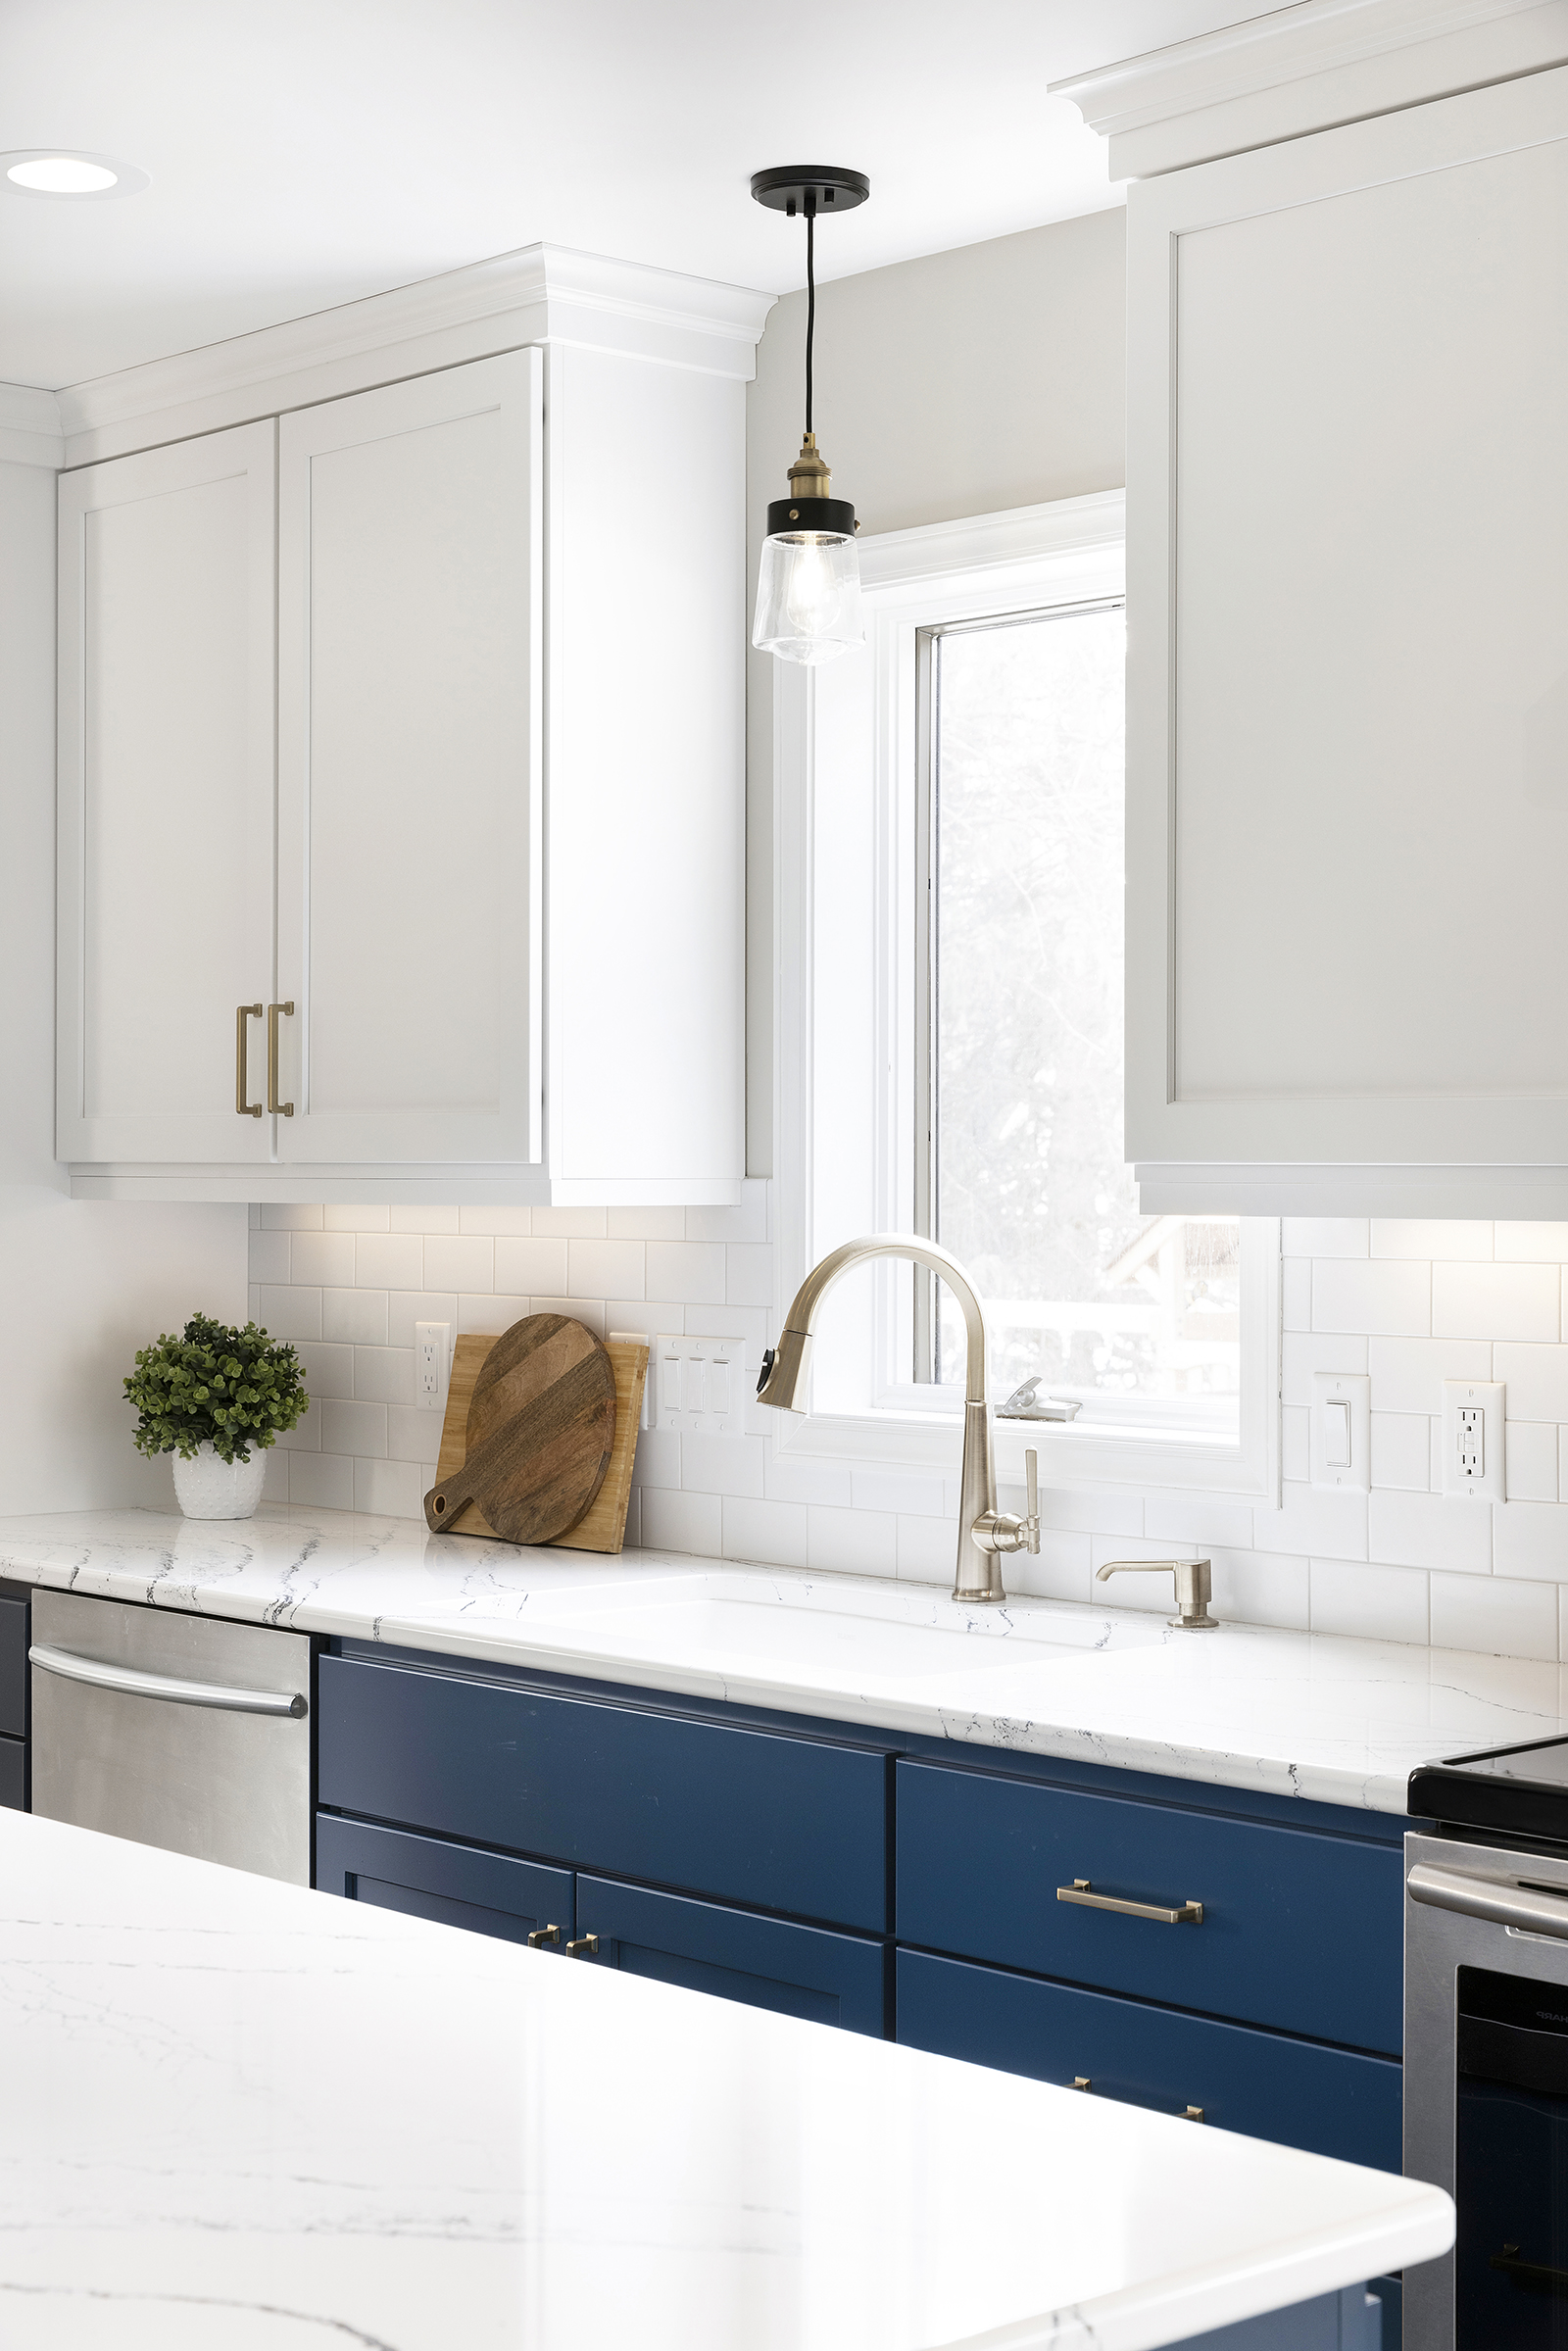 Renovated kitchen with blue base cabinets, white upper cabinets, and sink with window and light